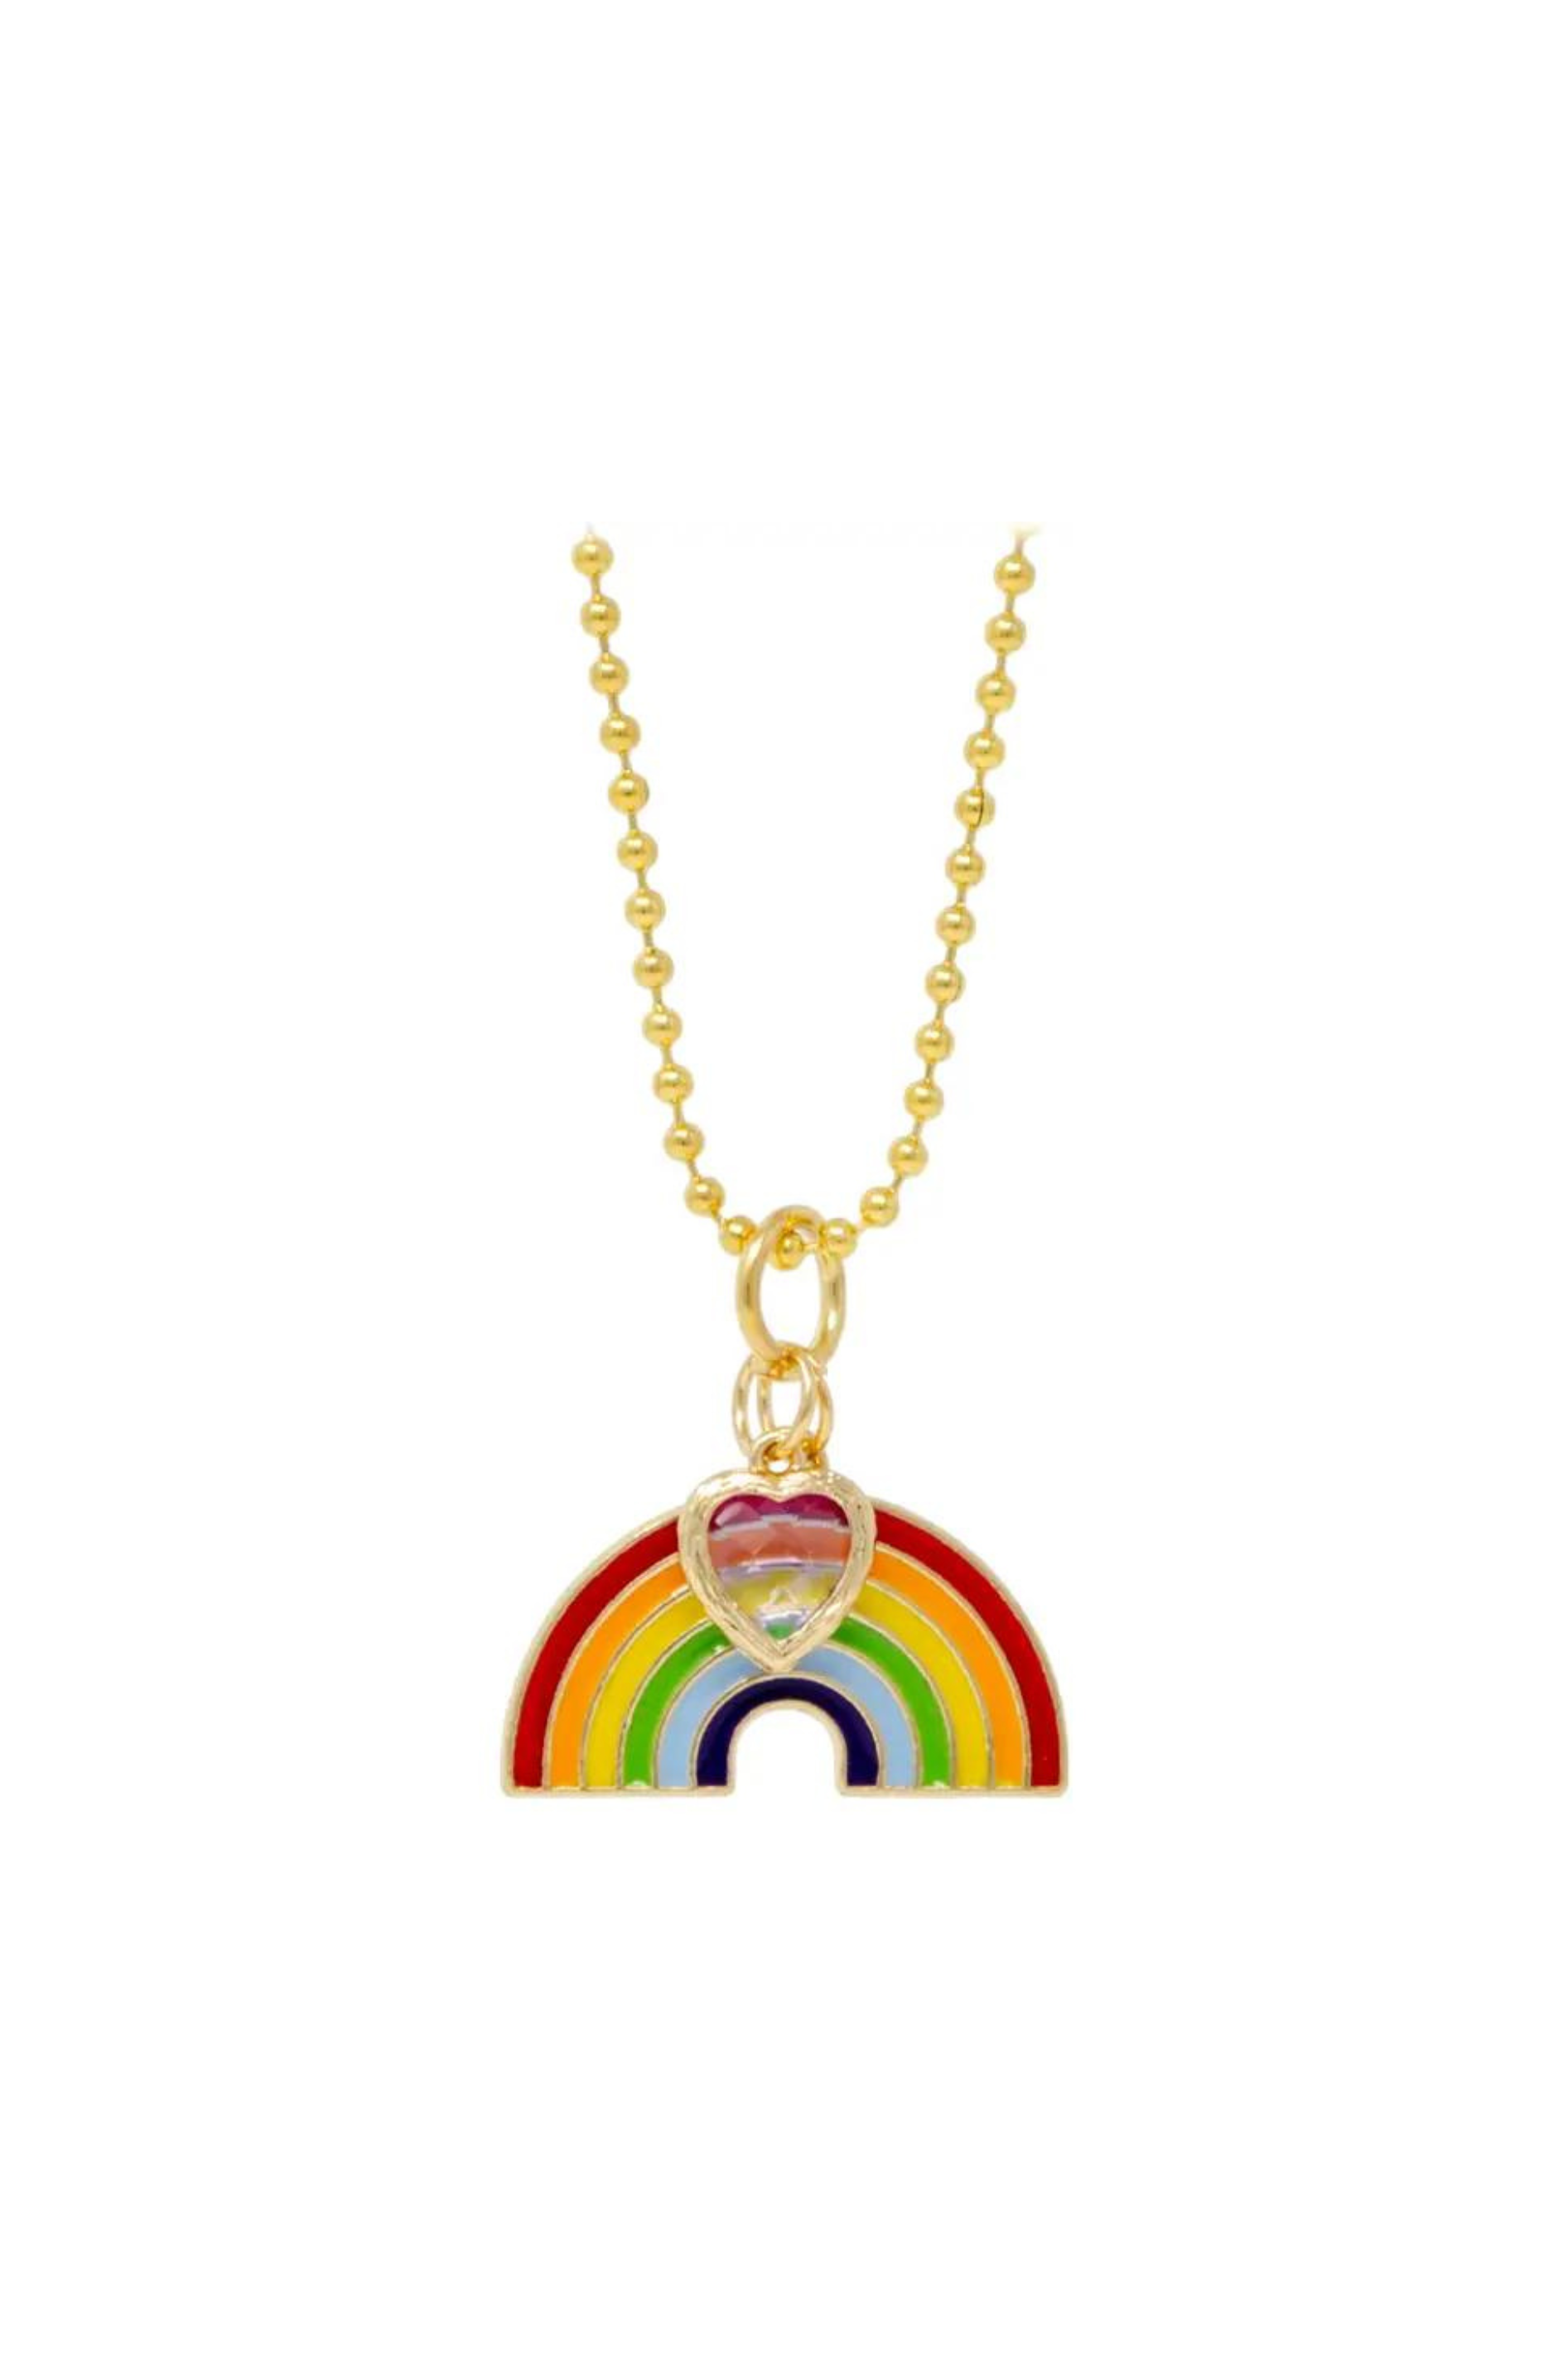 RAINBOW NECKLACE from Foreveronline | Rainbow necklace, Rainbow jewelry,  Gifts for girls